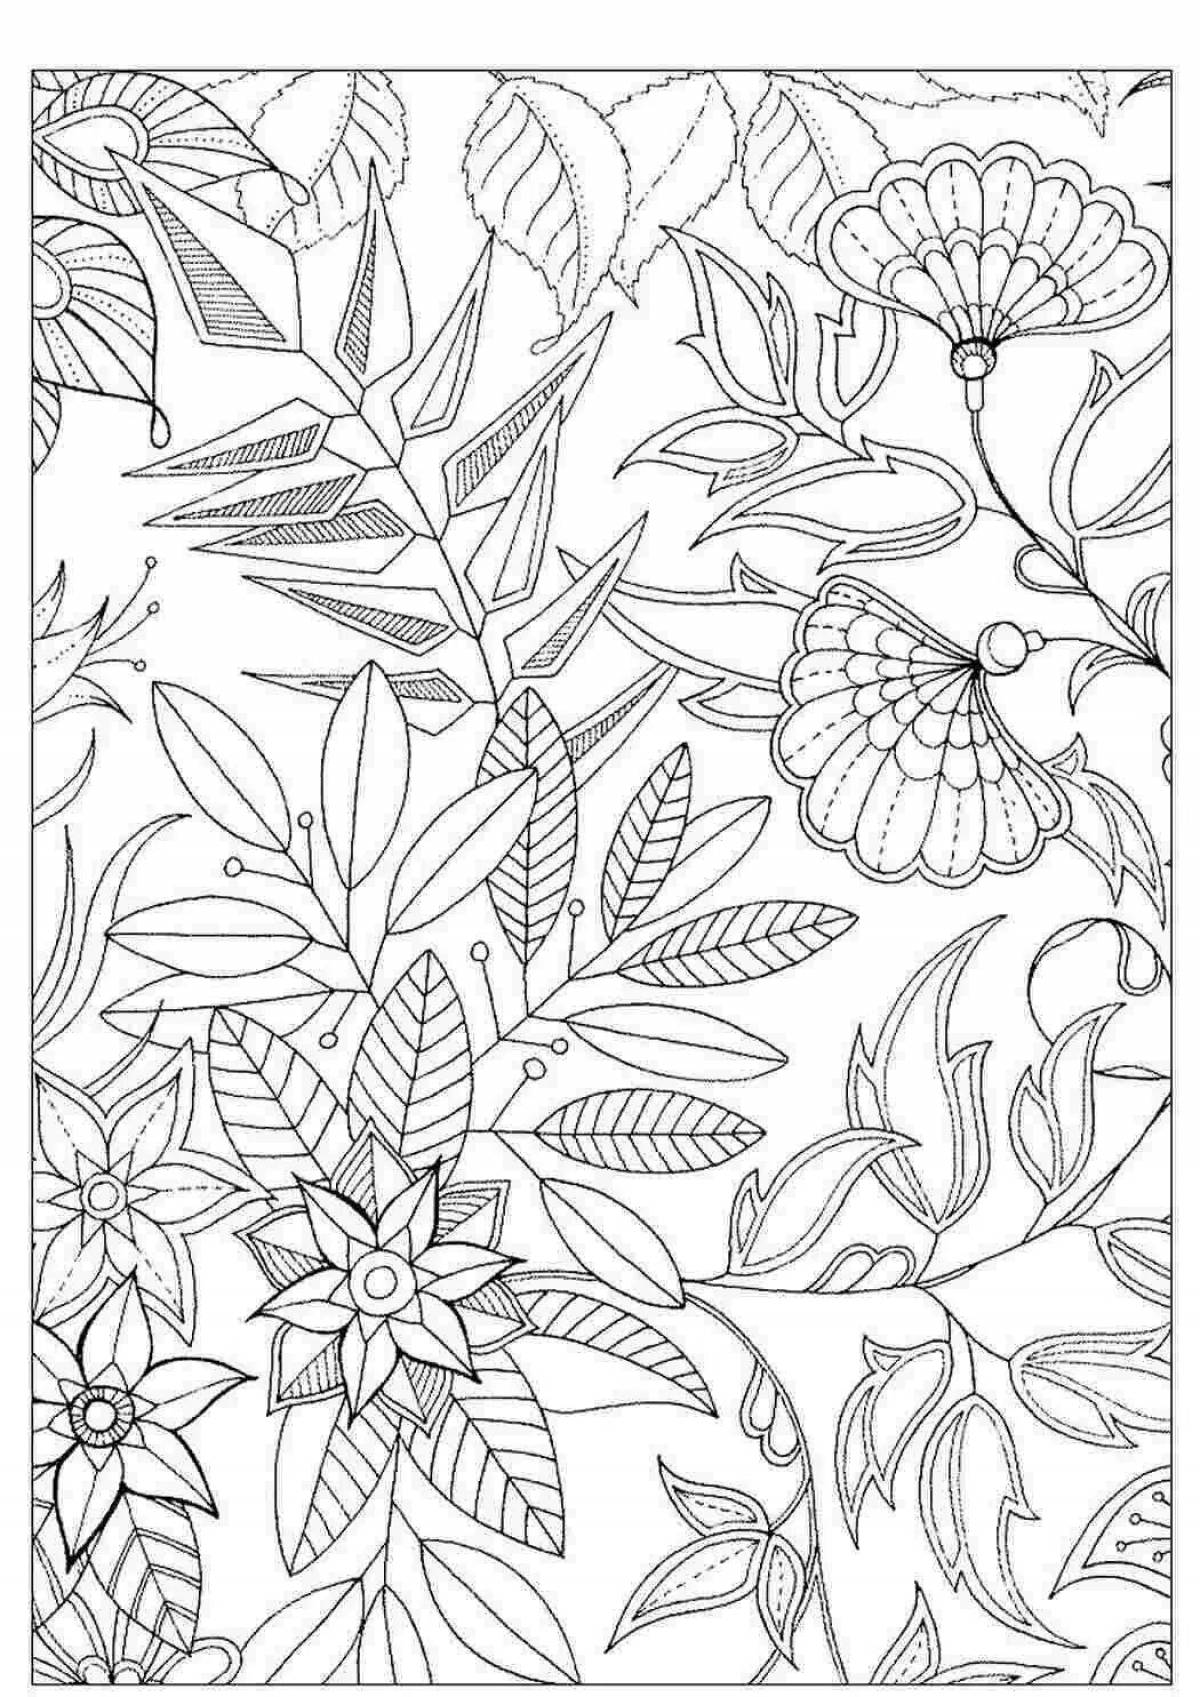 Blissful garden coloring page